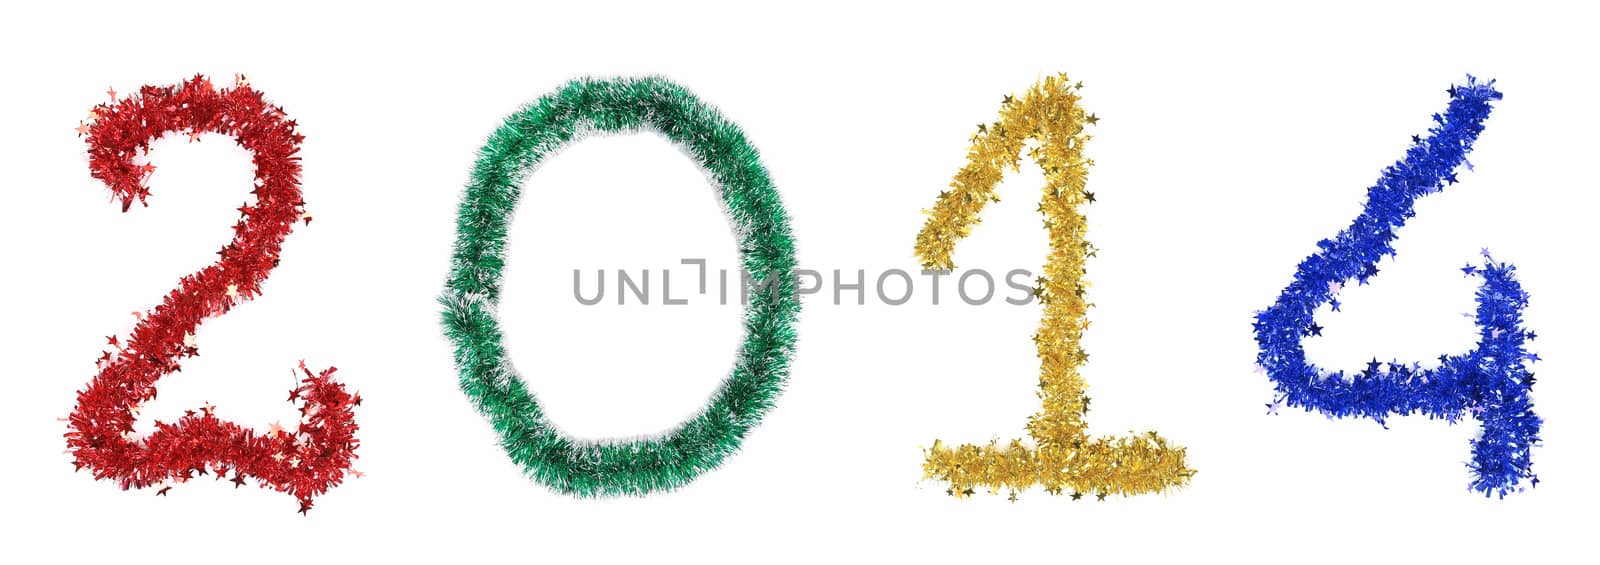 Year 2014 made from tinsel. Isolated on a white background.